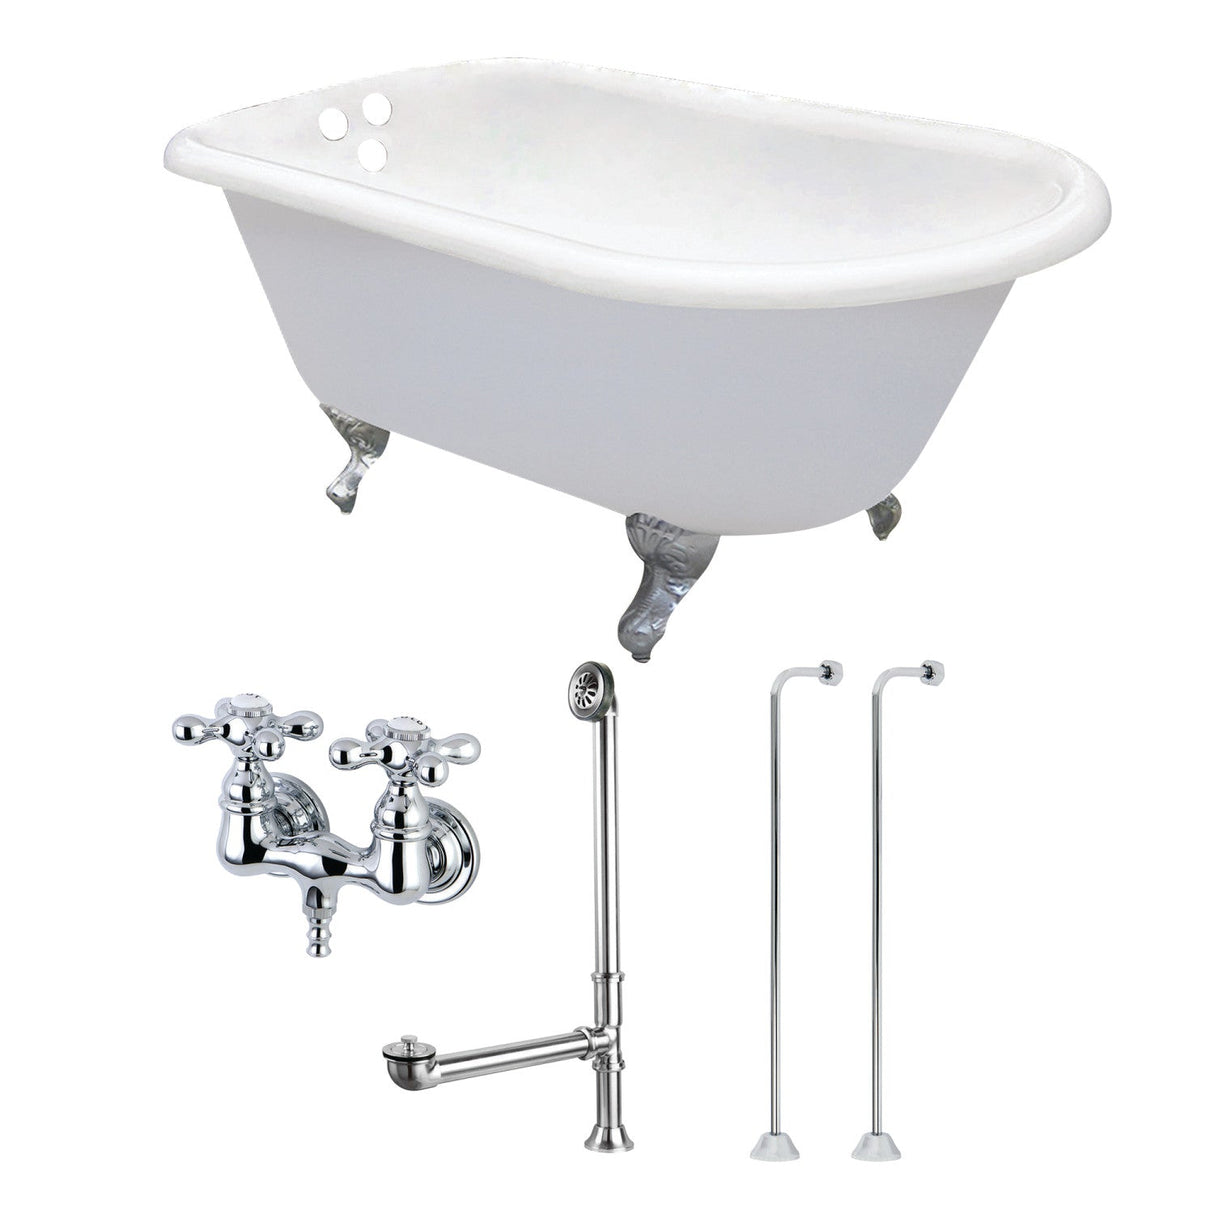 Aqua Eden KCT3D543019C1 54-Inch Cast Iron Roll Top Clawfoot Tub Combo with Faucet and Supply Lines, White/Polished Chrome